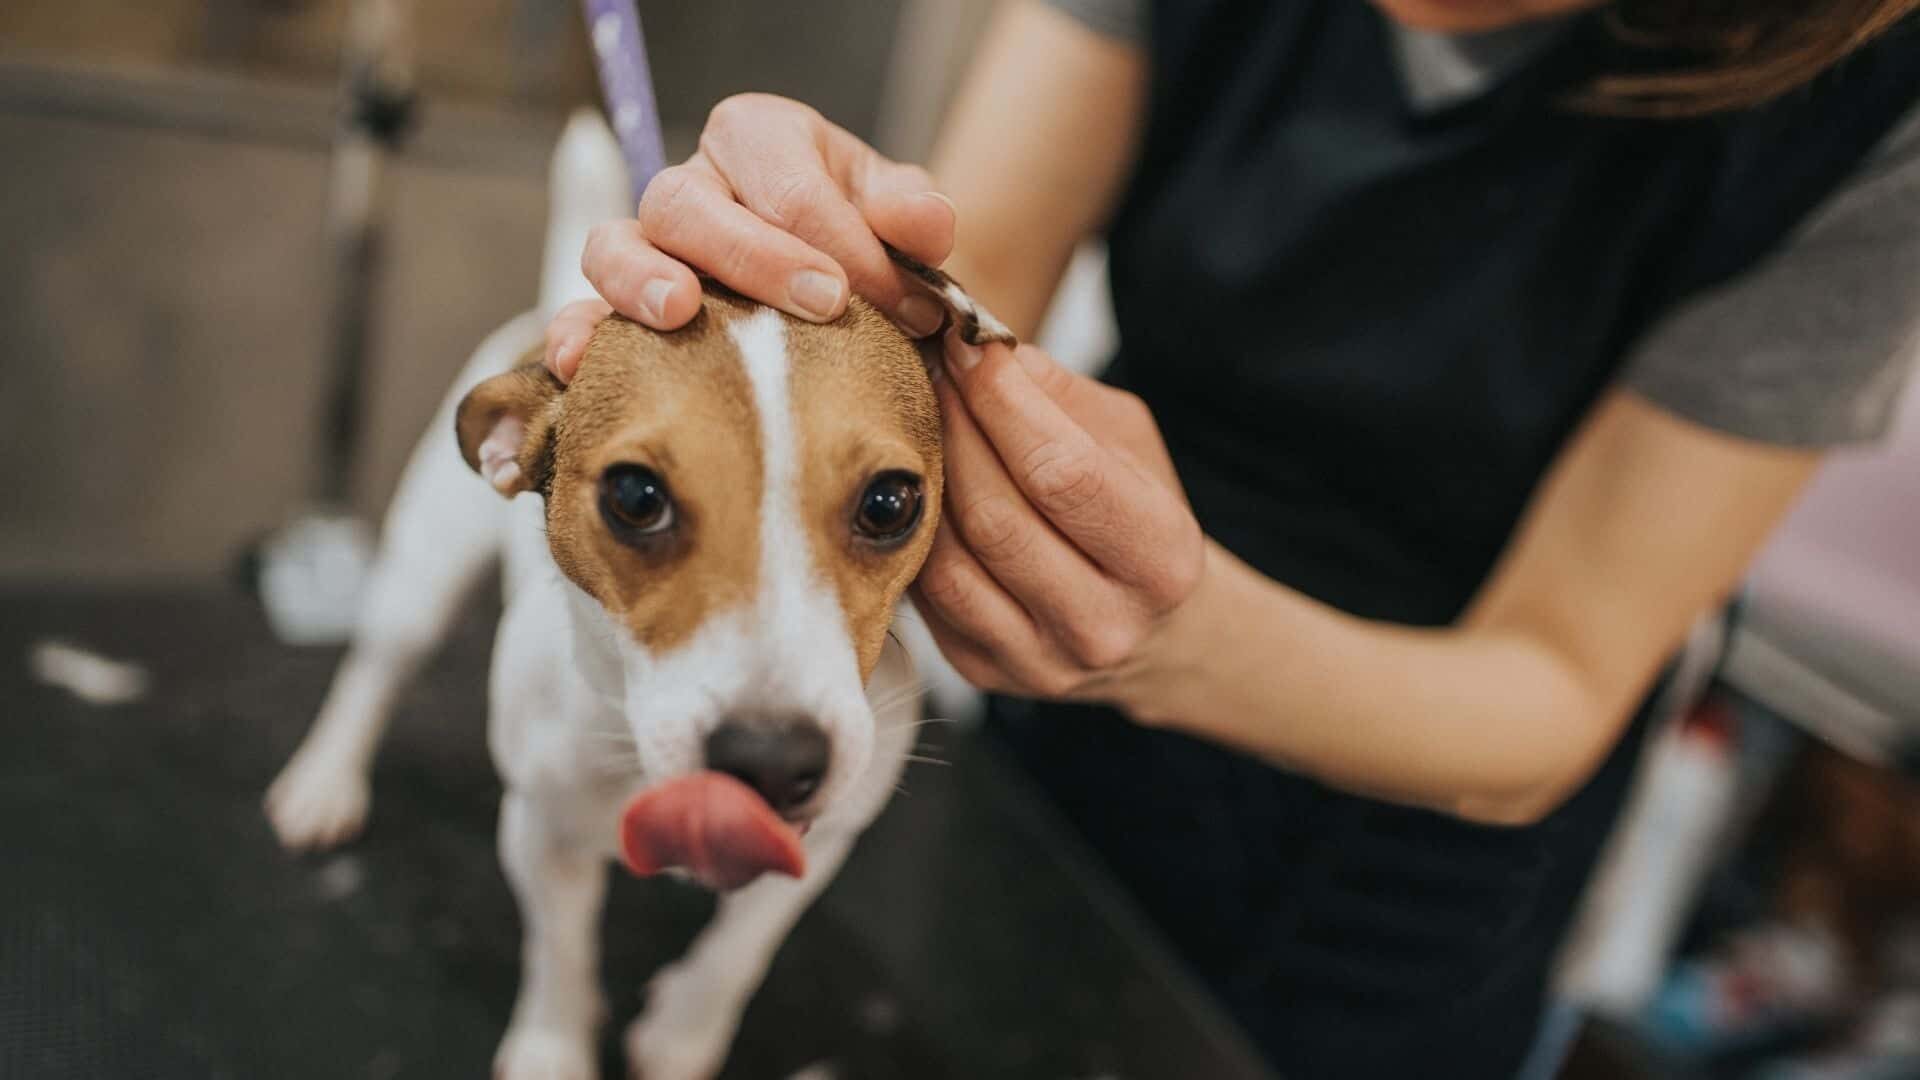 How to clean dog’s ears?